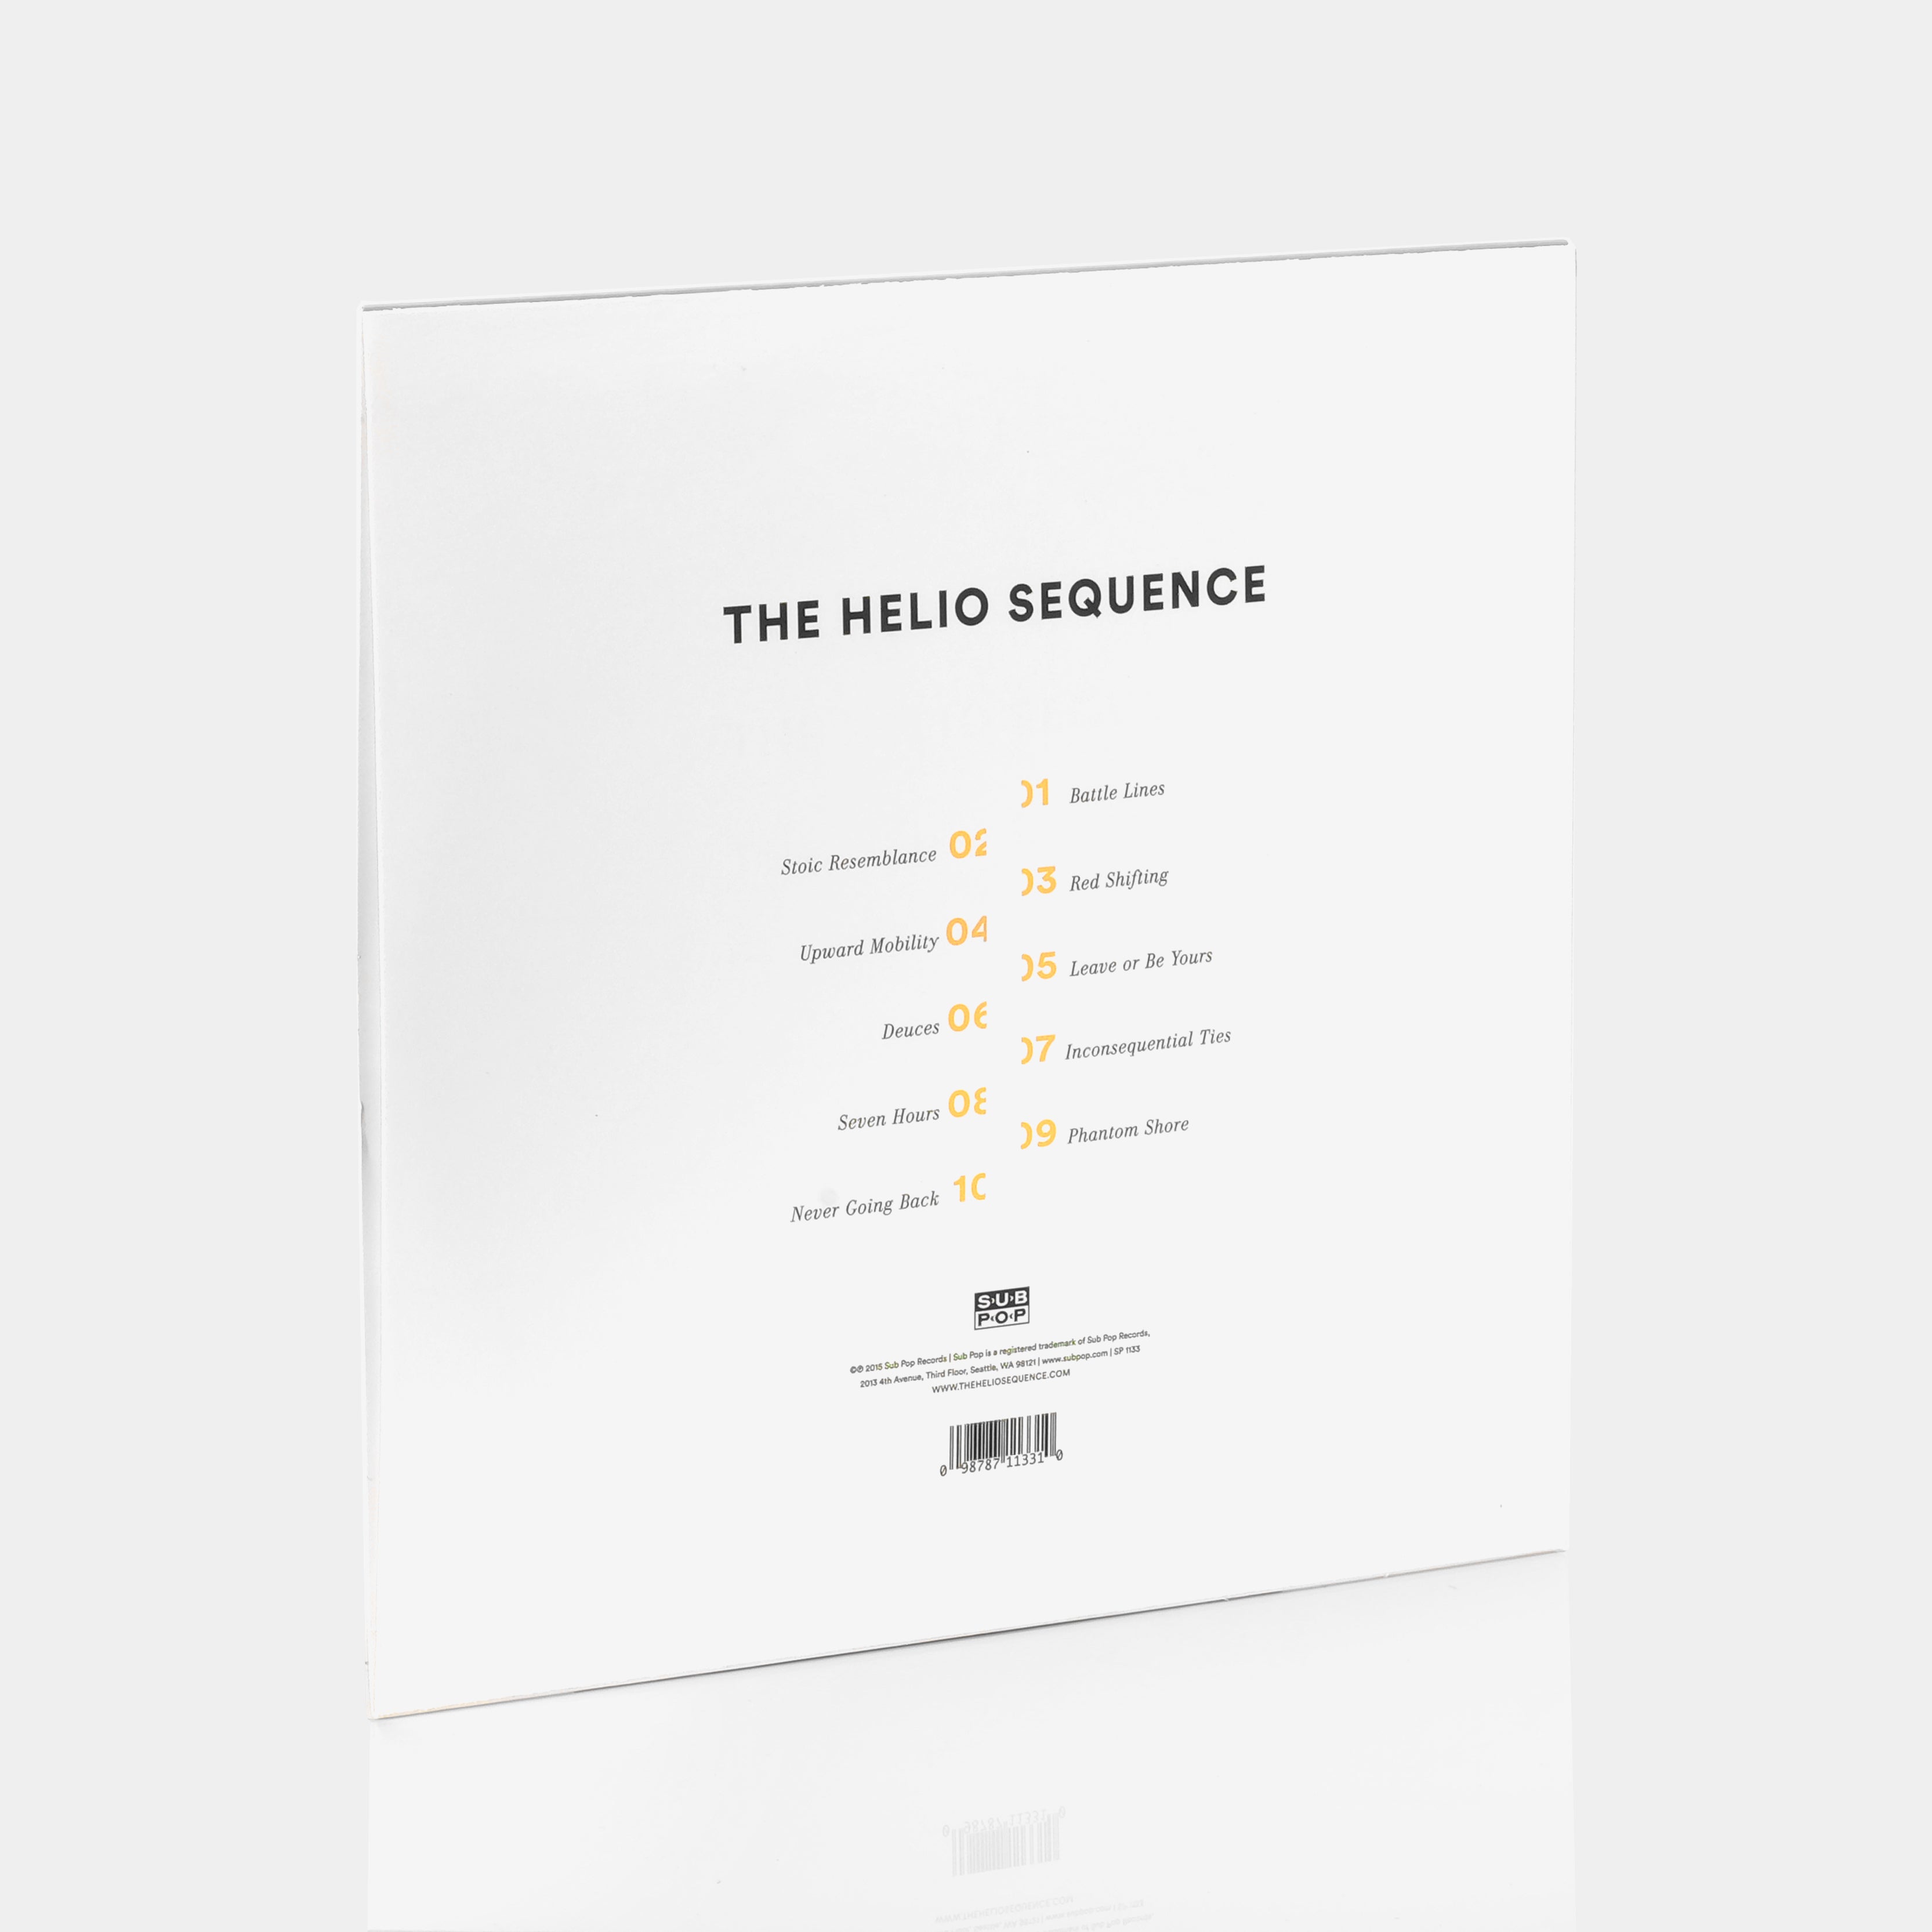 The Helio Sequence - The Helio Sequence LP Vinyl Record